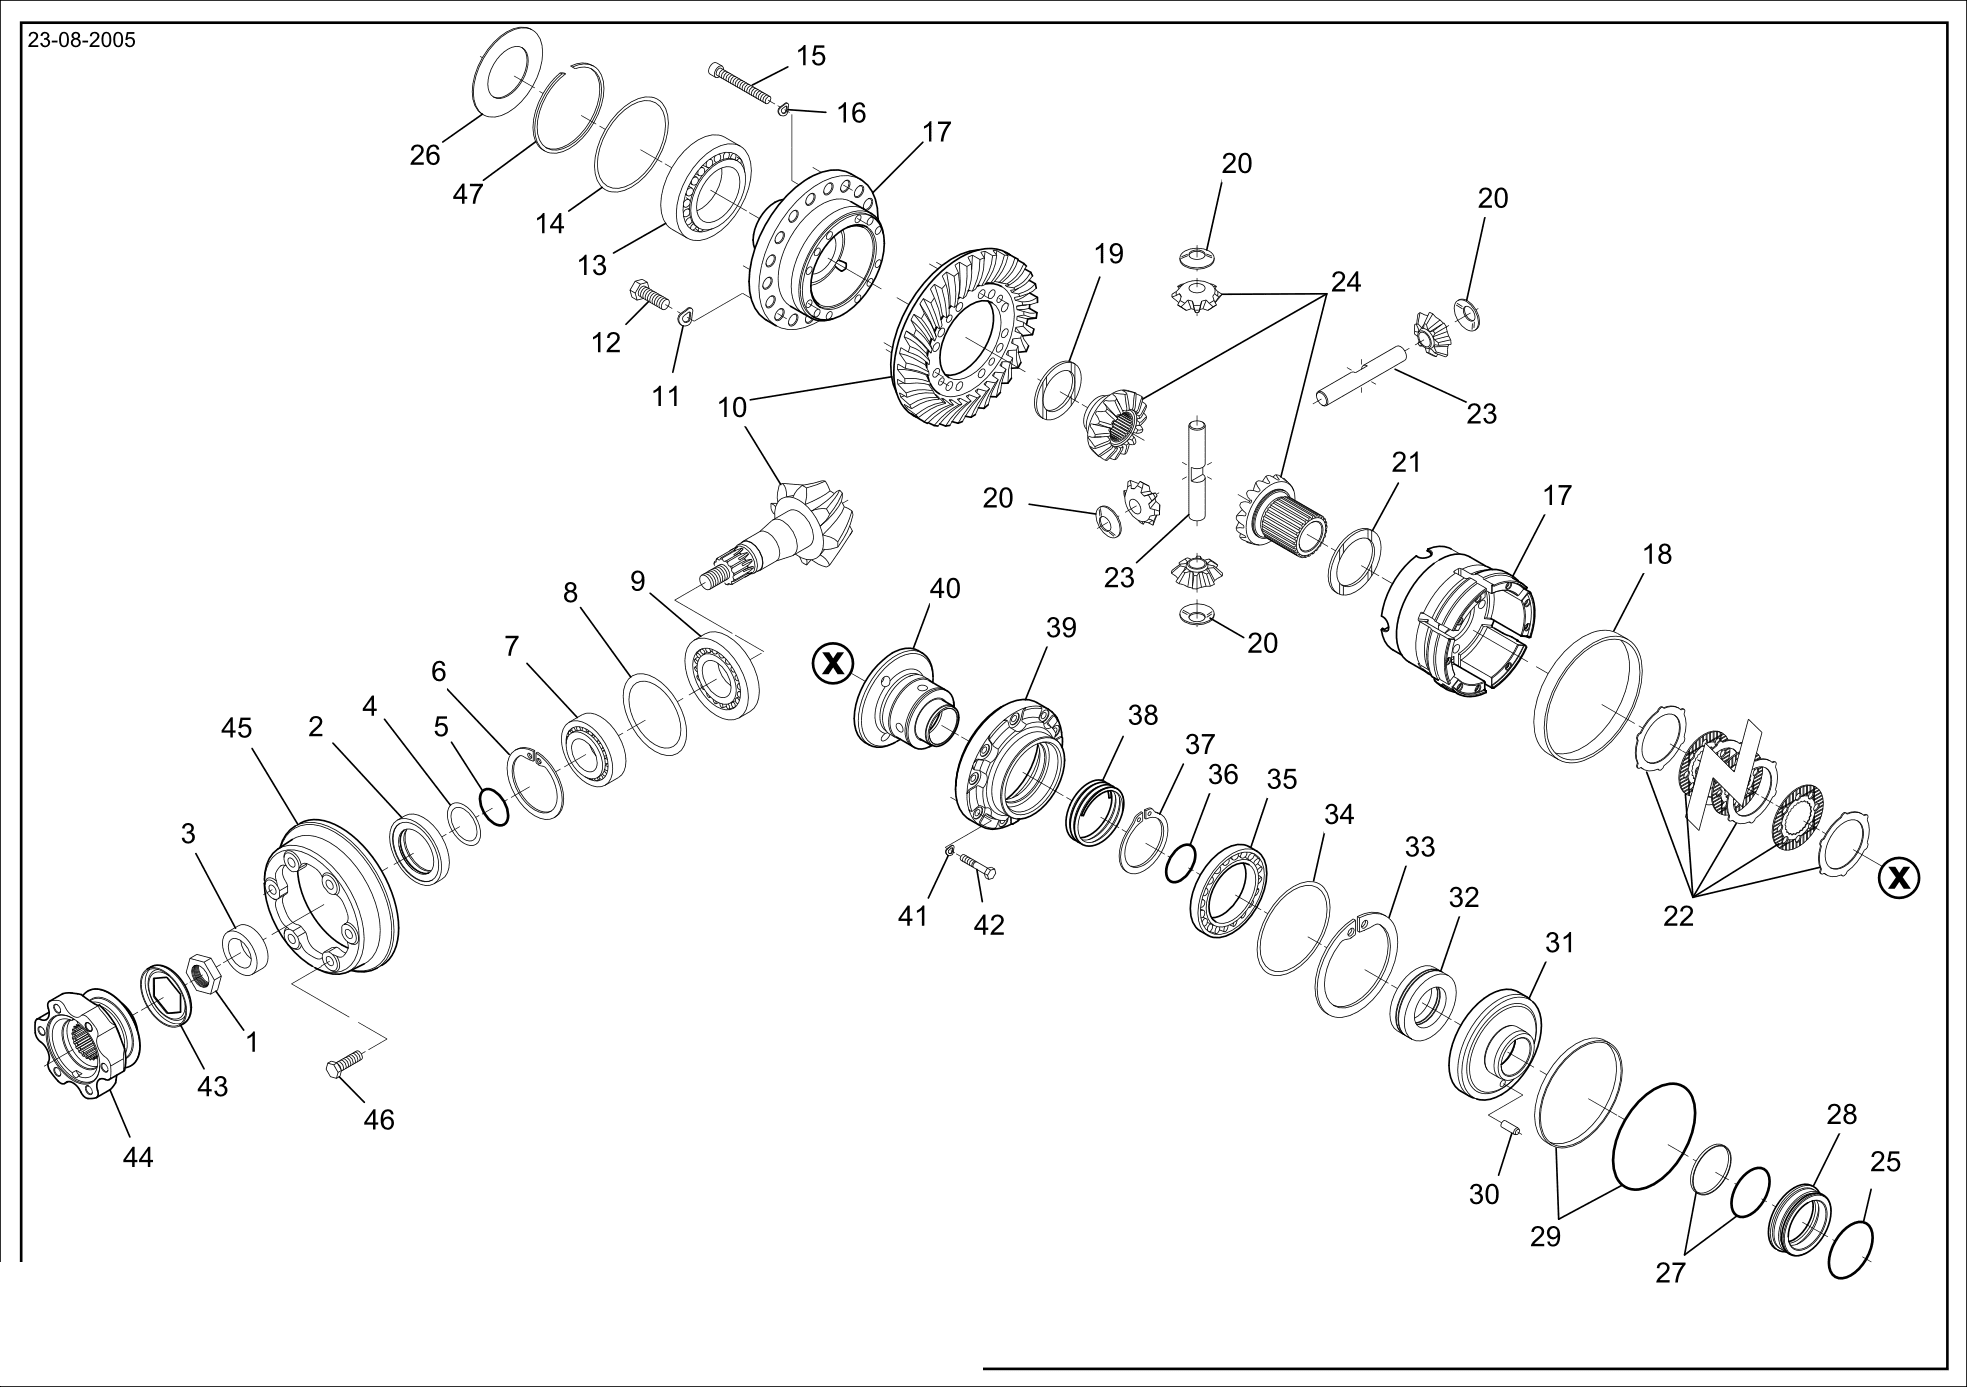 drawing for AGCO 57970 - BOLT (figure 5)